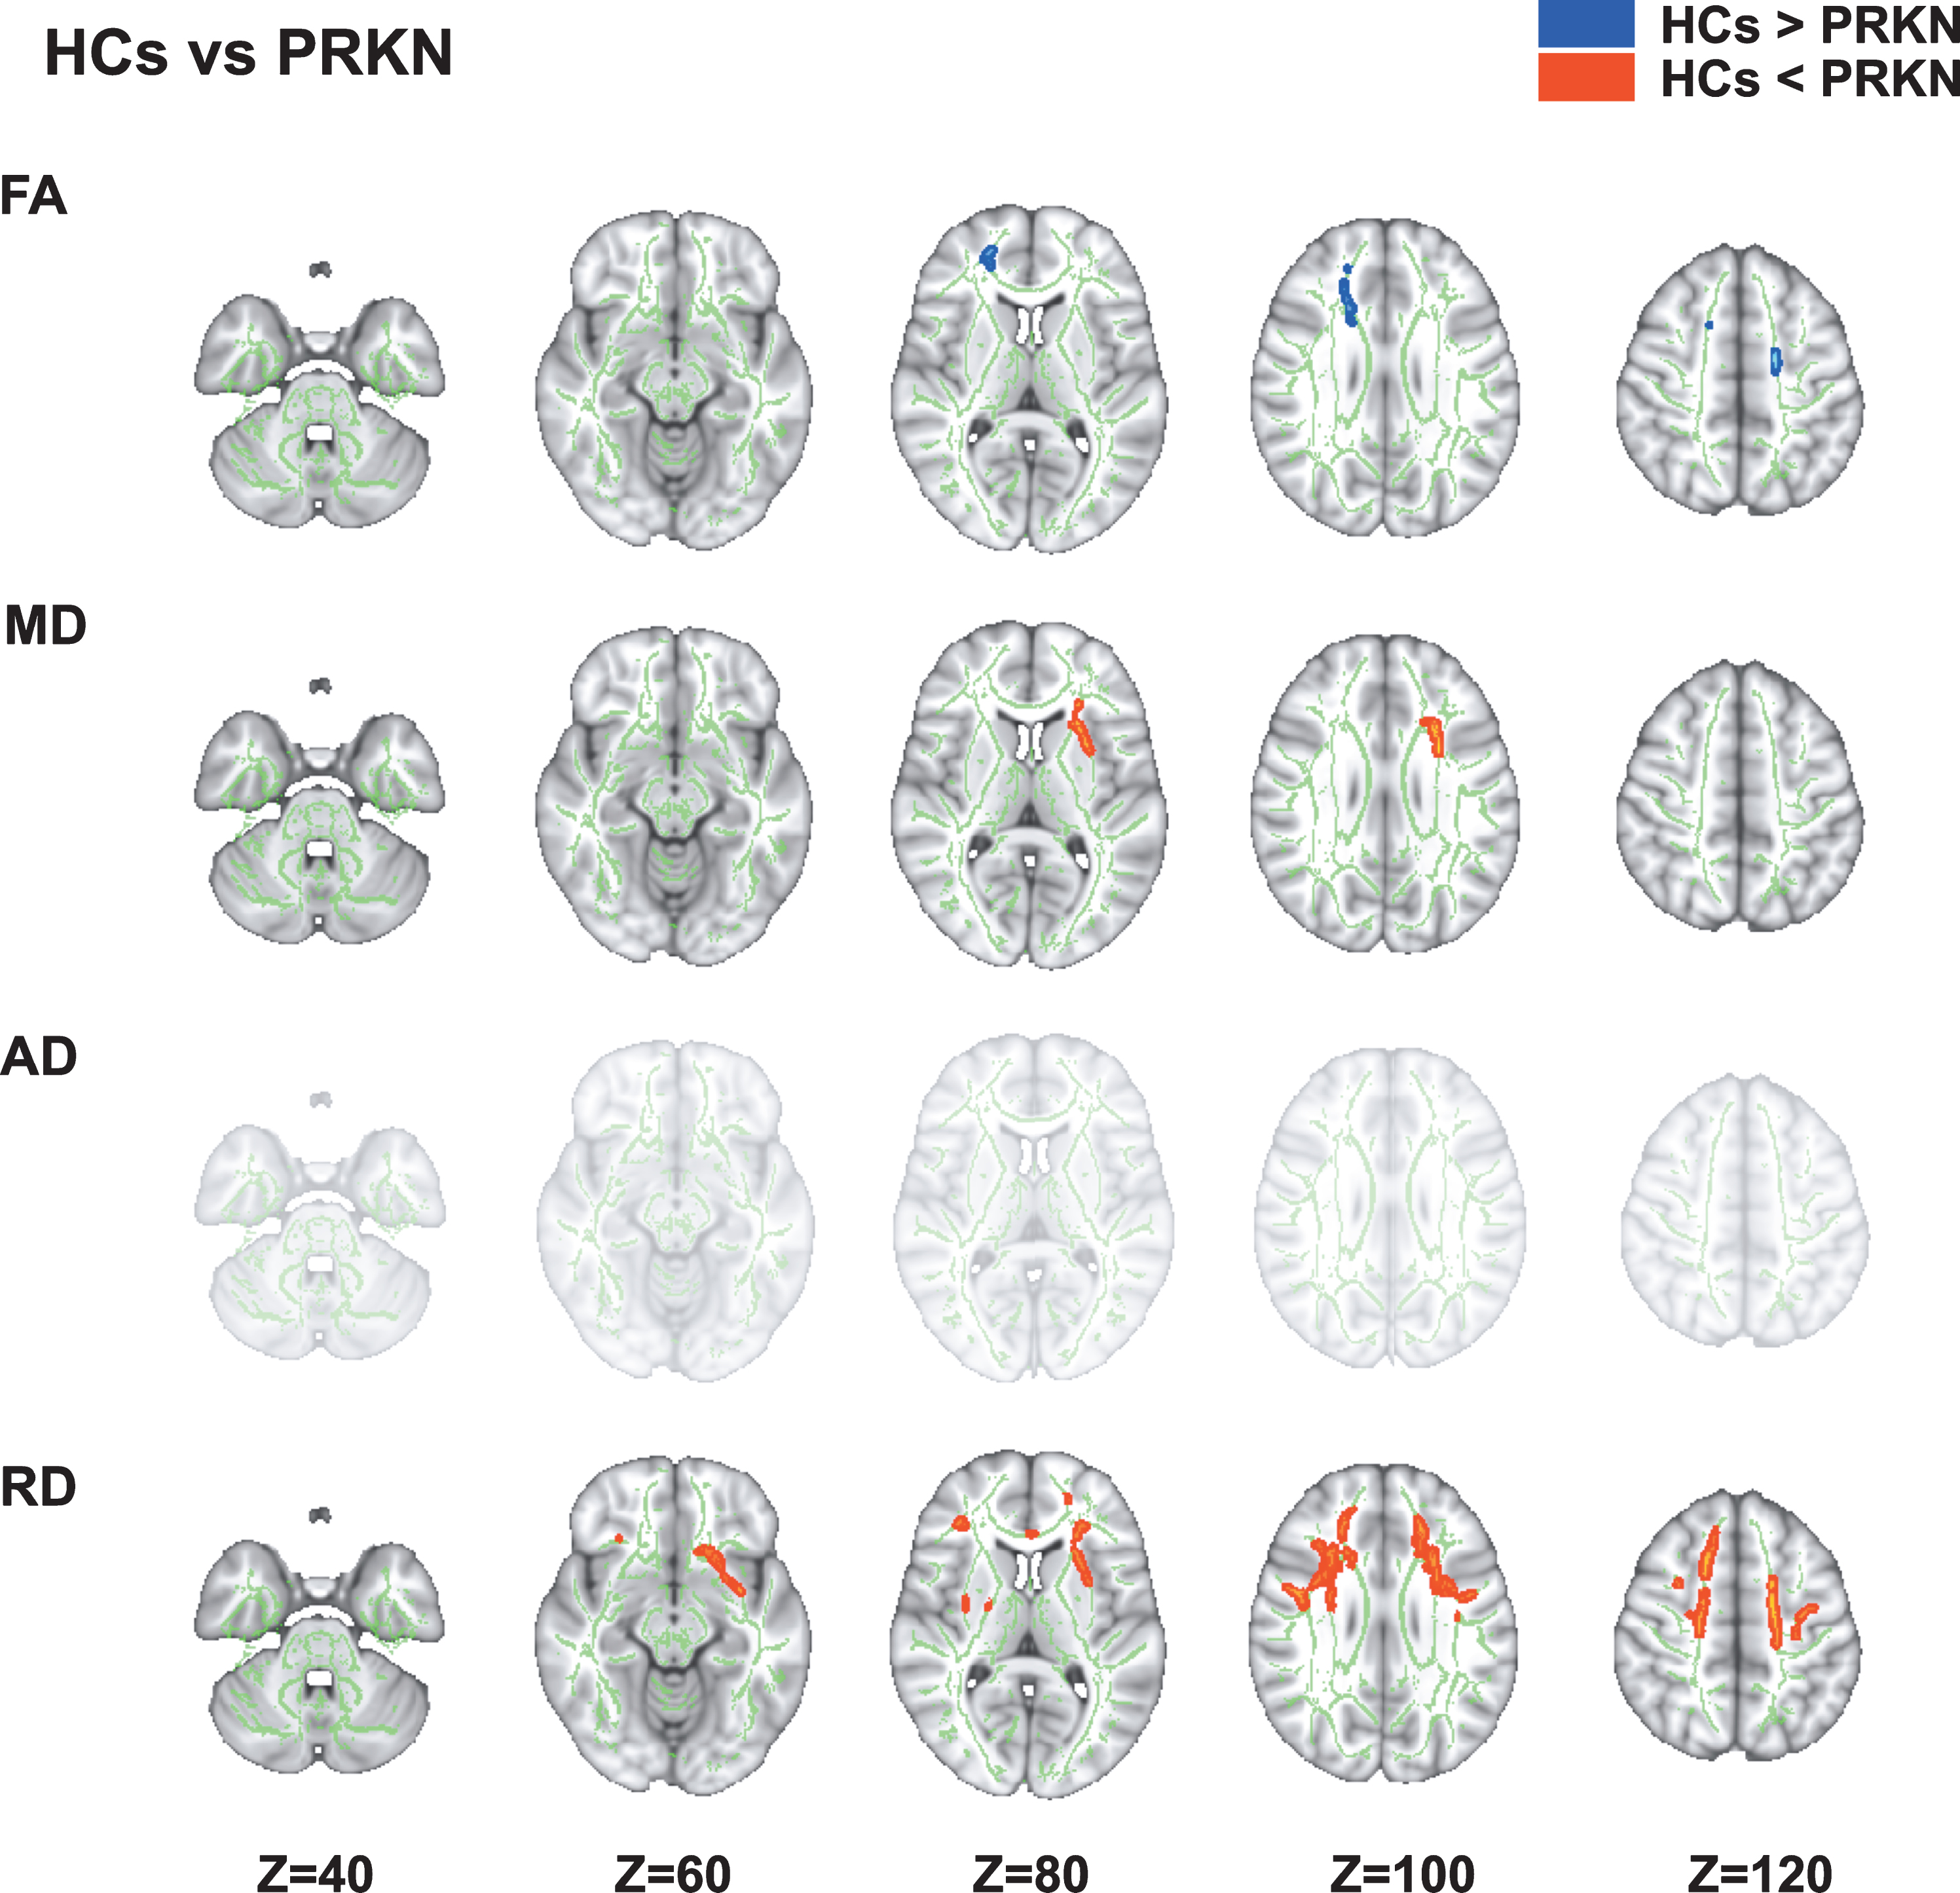 Comparison of diffusion tensor imaging between healthy controls and patients with Parkinson’s disease caused by PRKN mutations. The tract-based spatial statistics analyses show that PRKN patients have significantly lower FA (blue/light-blue voxels; p < 0.05) and significantly higher MD and RD (red voxels; p < 0.05) compared with HCs. FA, fractional anisotropy; HCs, healthy controls; MD, mean diffusivity; RD, radial diffusivity.